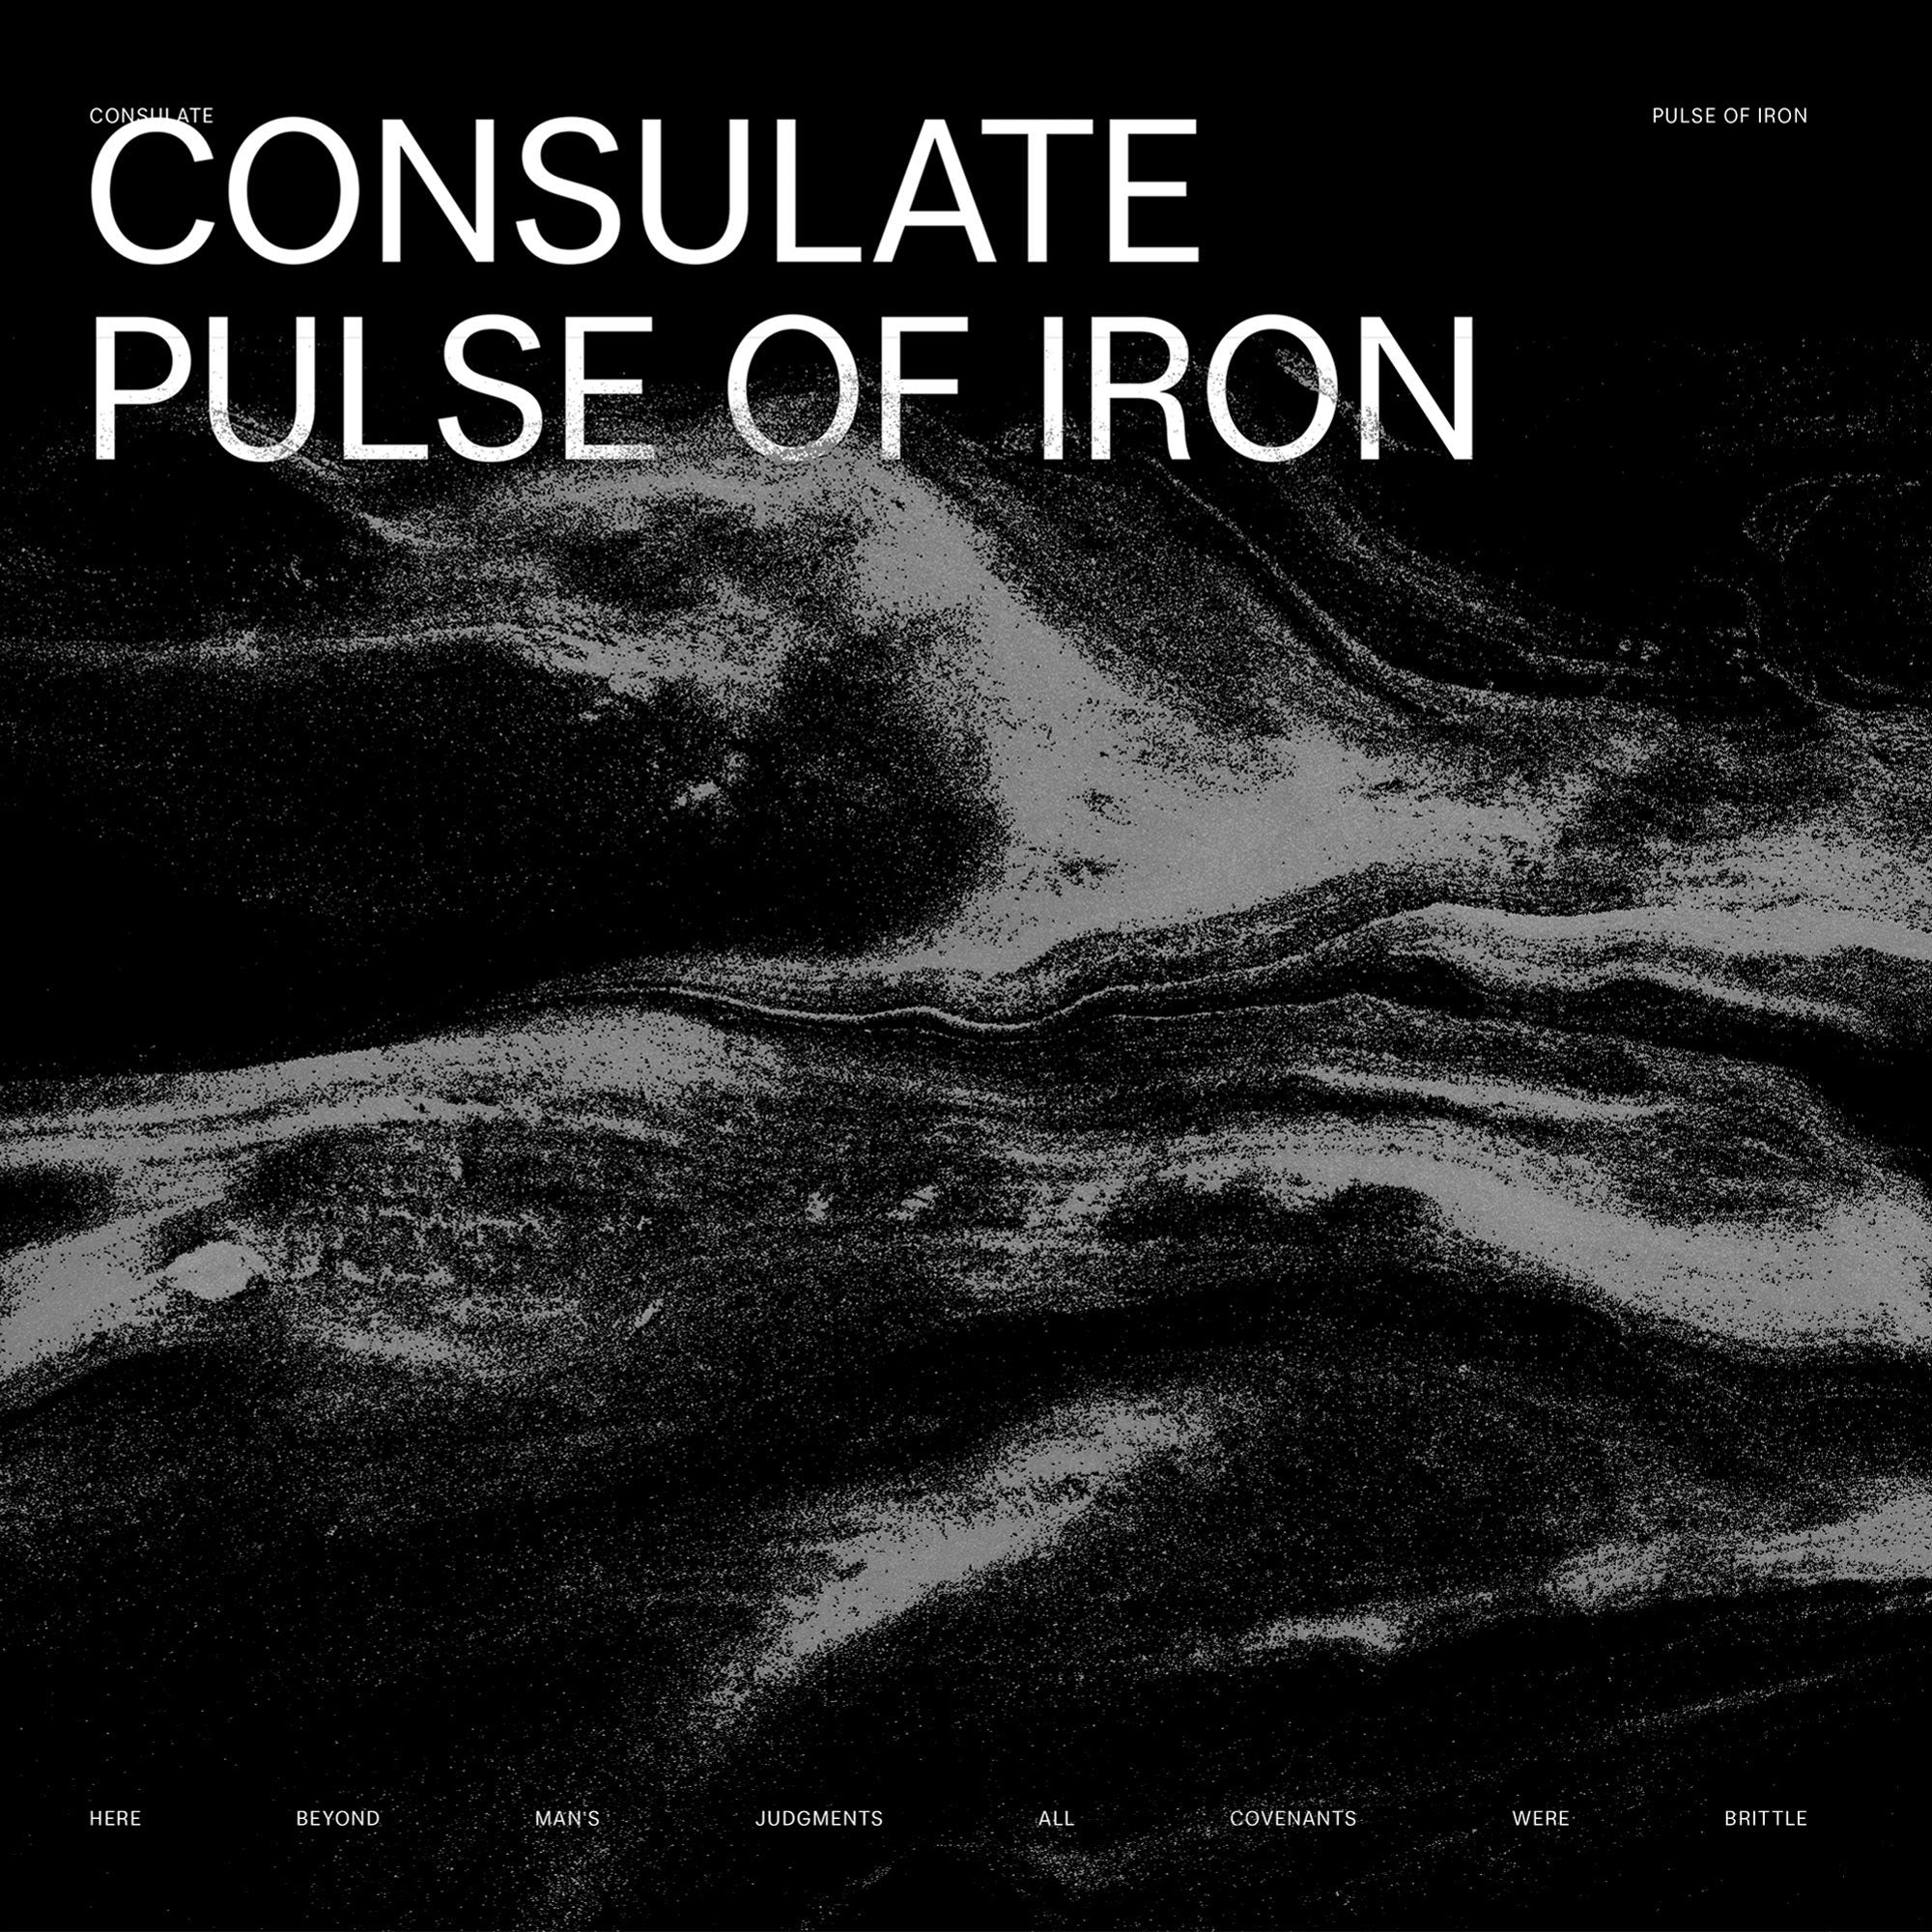 Consulate - The Pulse of Iron